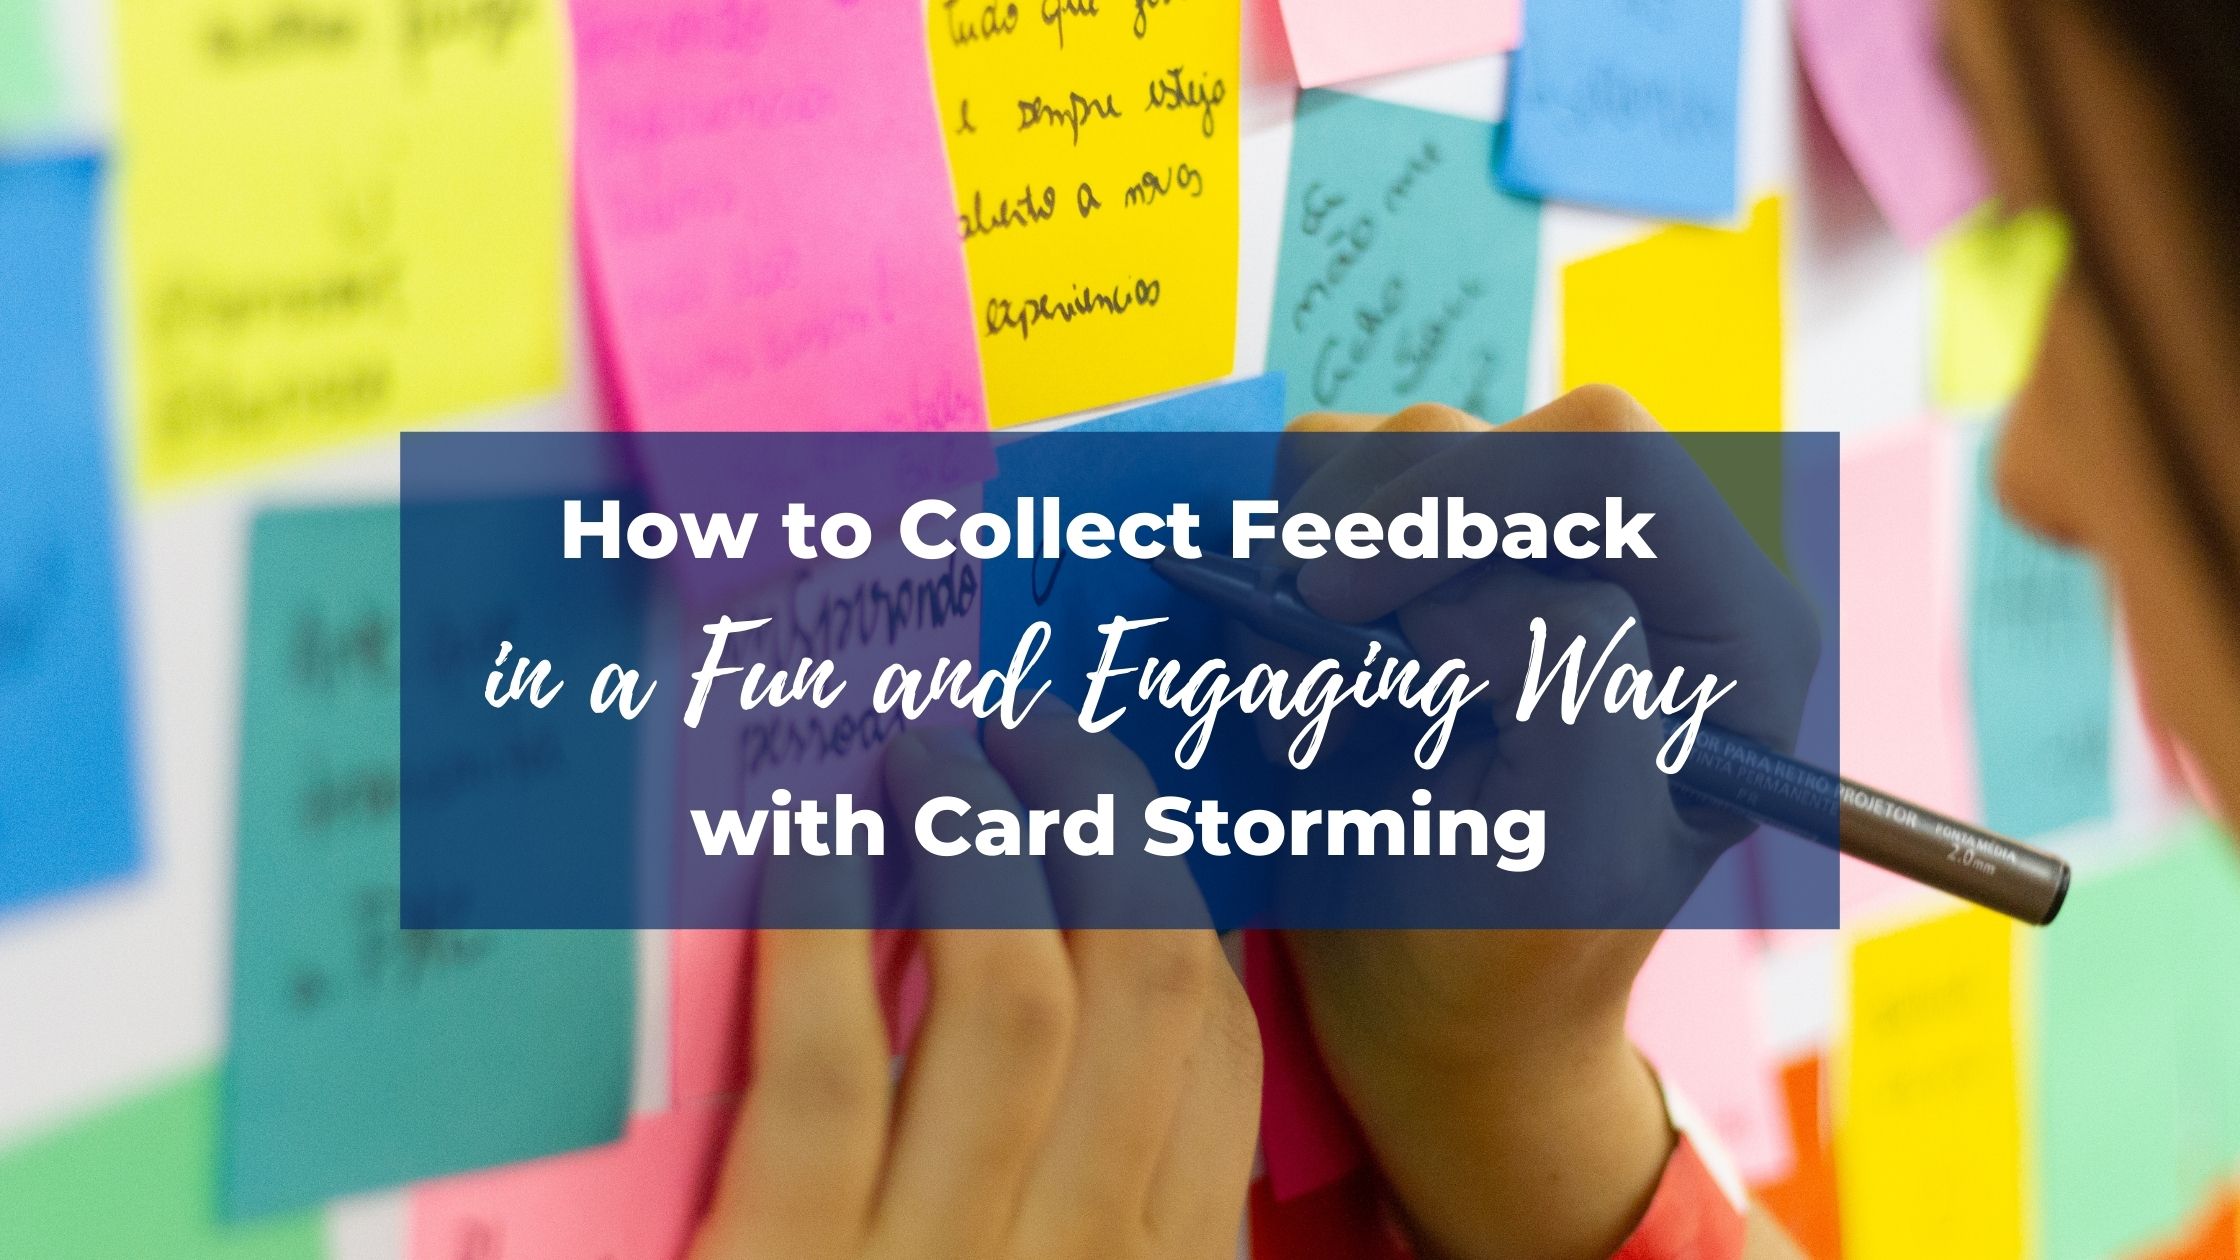 How to Collect Feedback in a Fun and Engaging Way with Card Storming